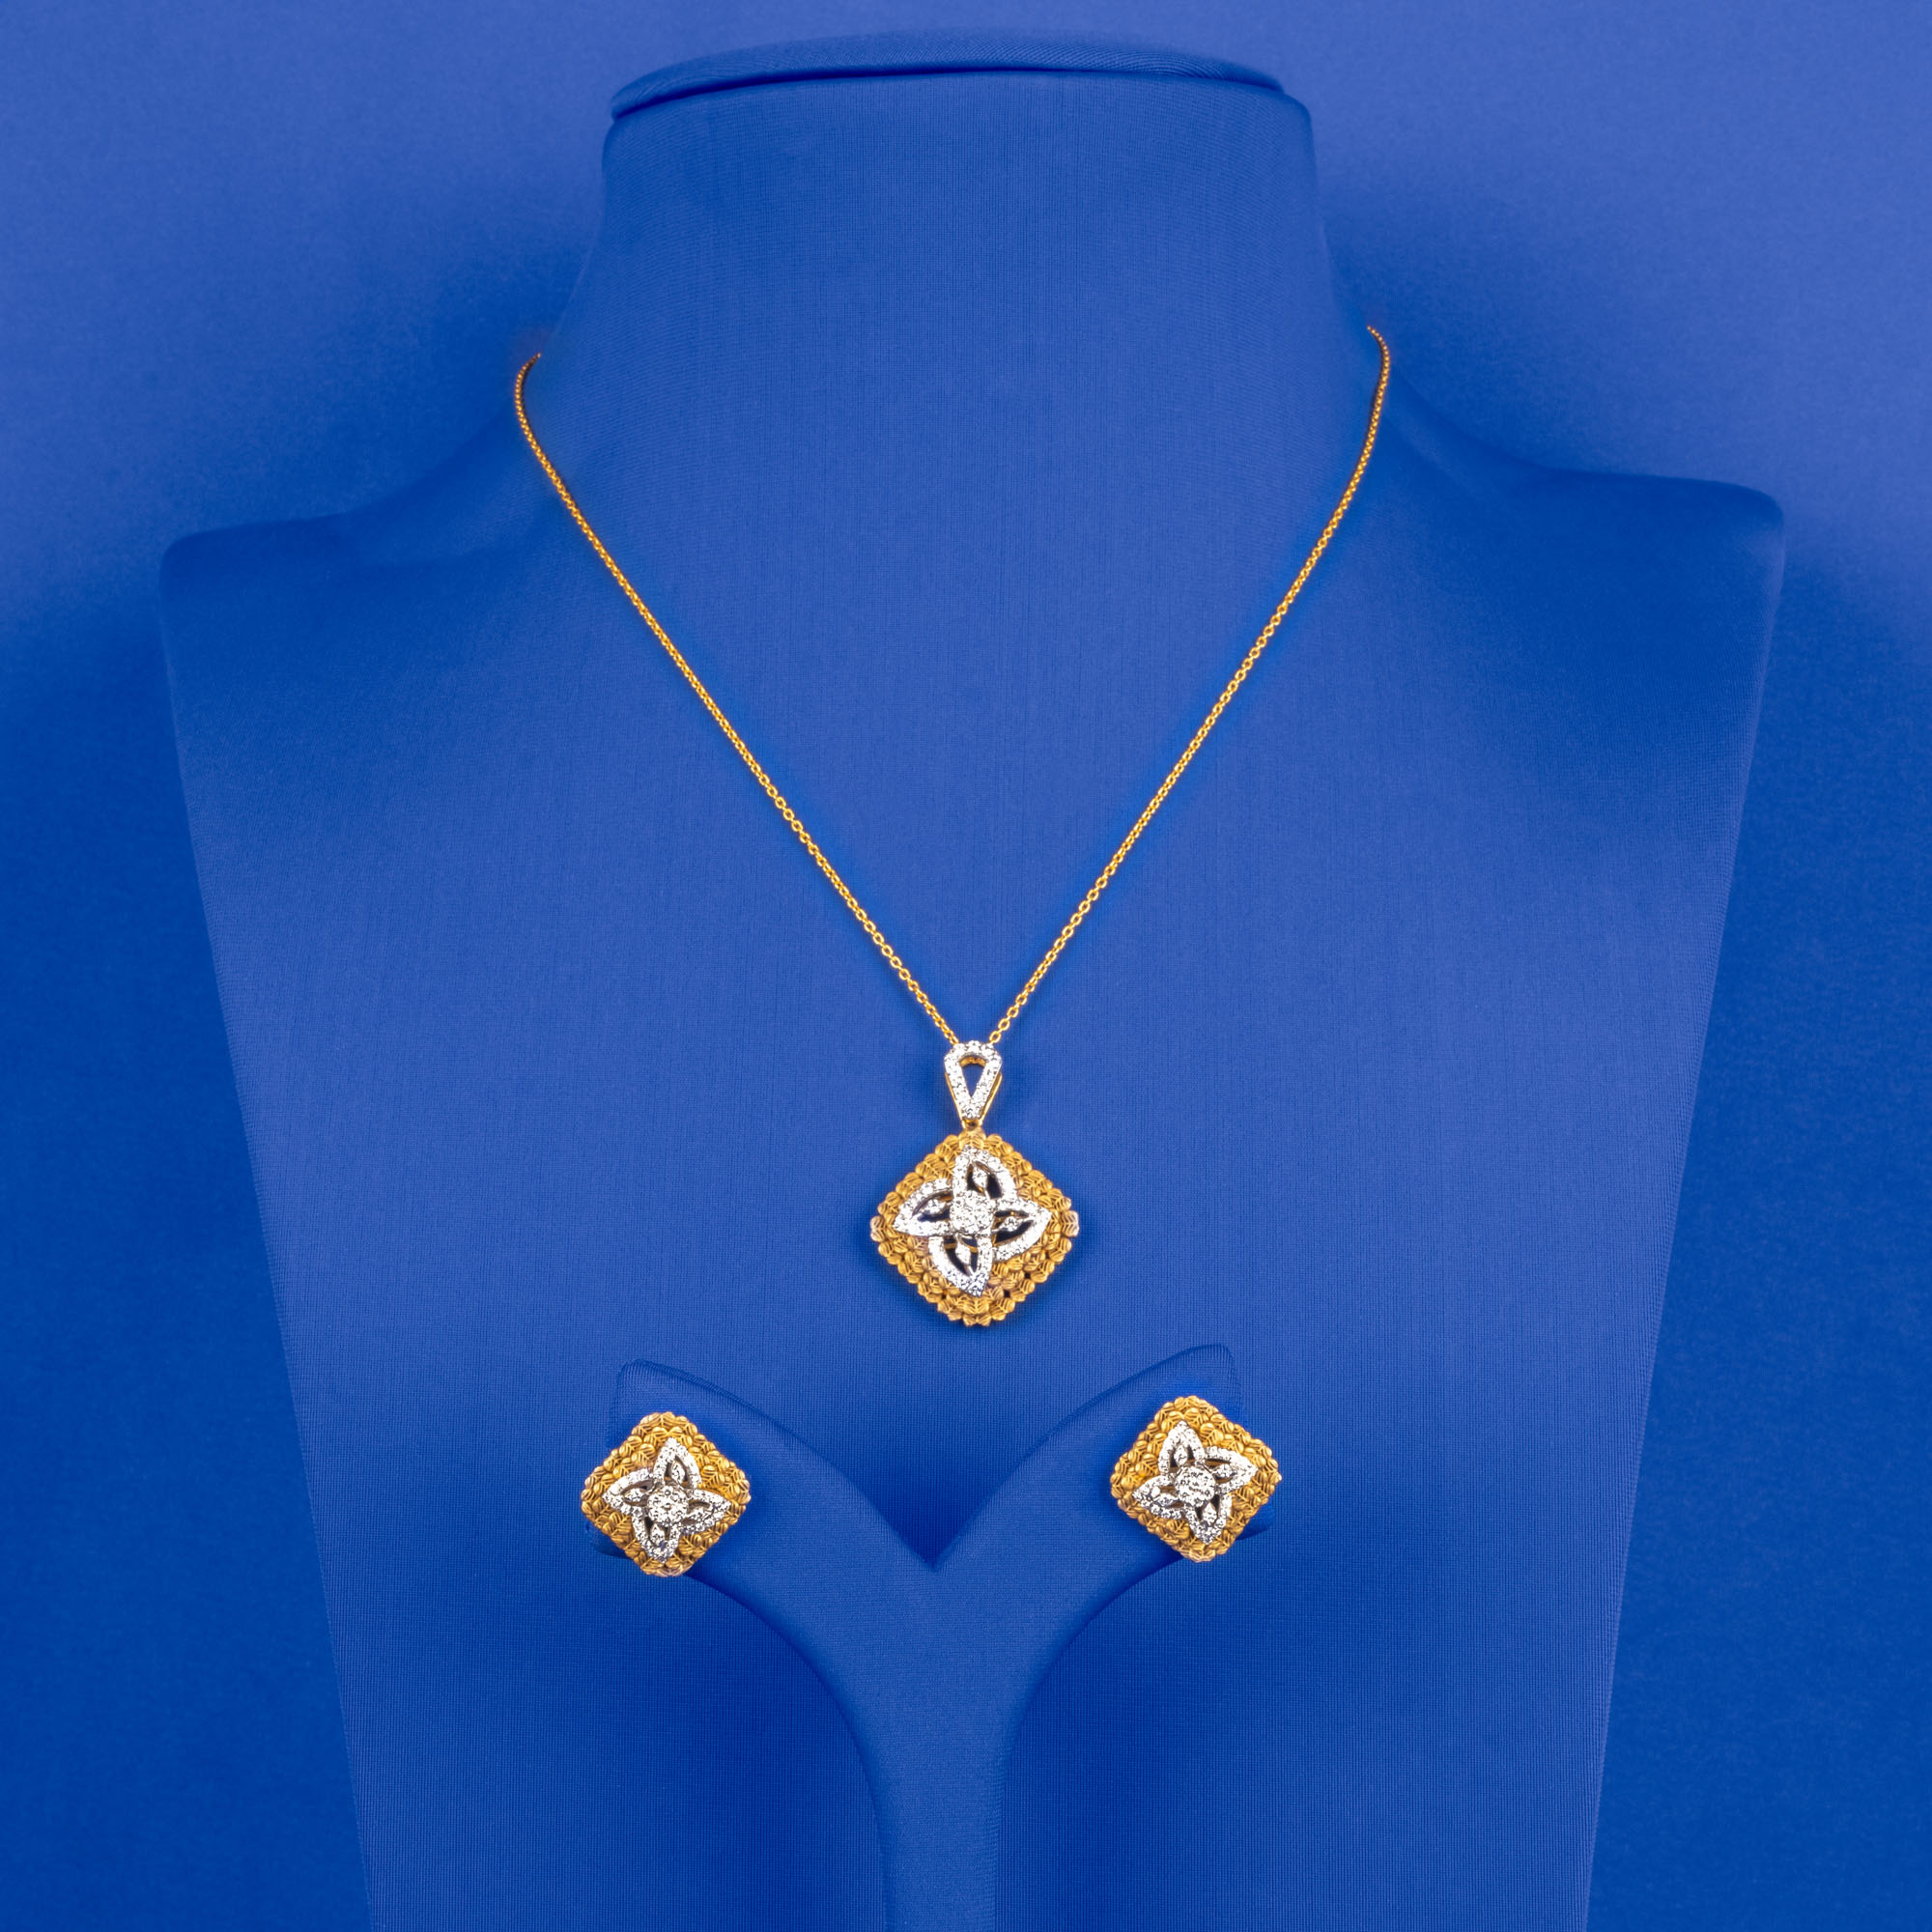 Radiant Reflections: Handmade 18k Yellow Gold Diamond Pendant and Earrings Set (Chain not included)